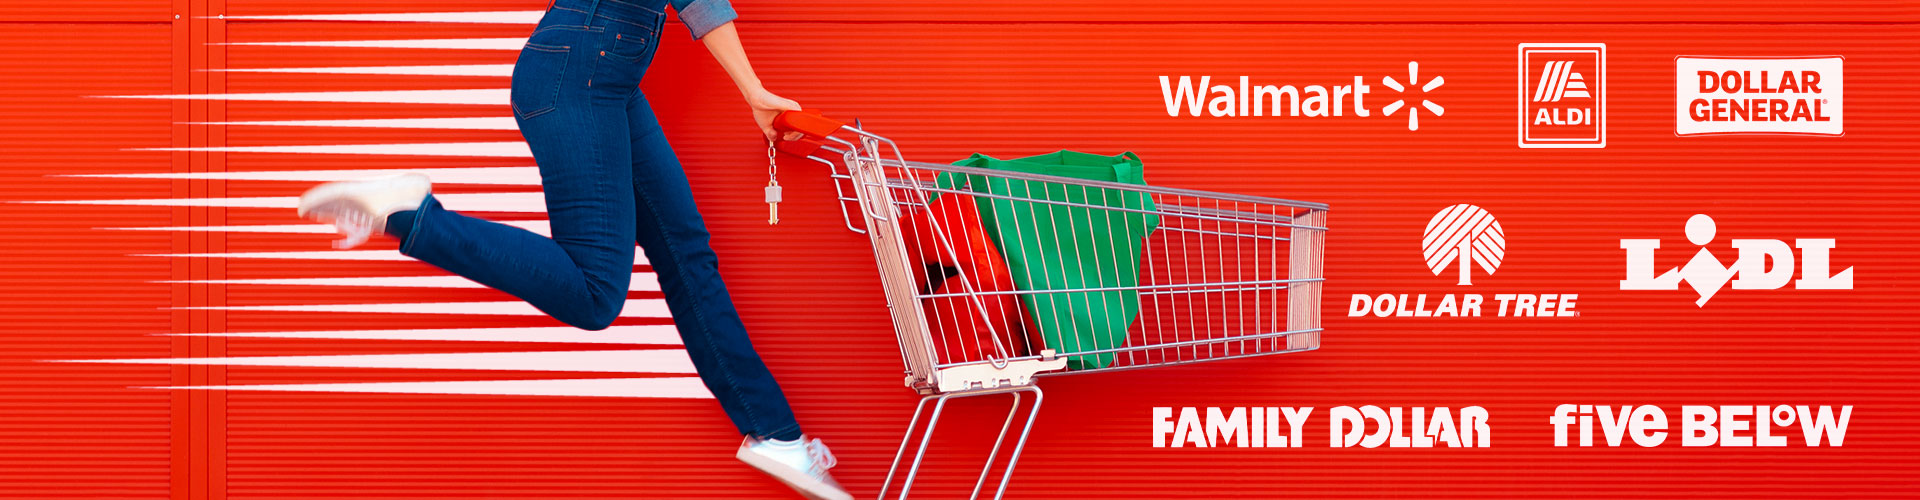 Blog banner featuring woman pushing a cart with motion lines behind her and several value retailer logos